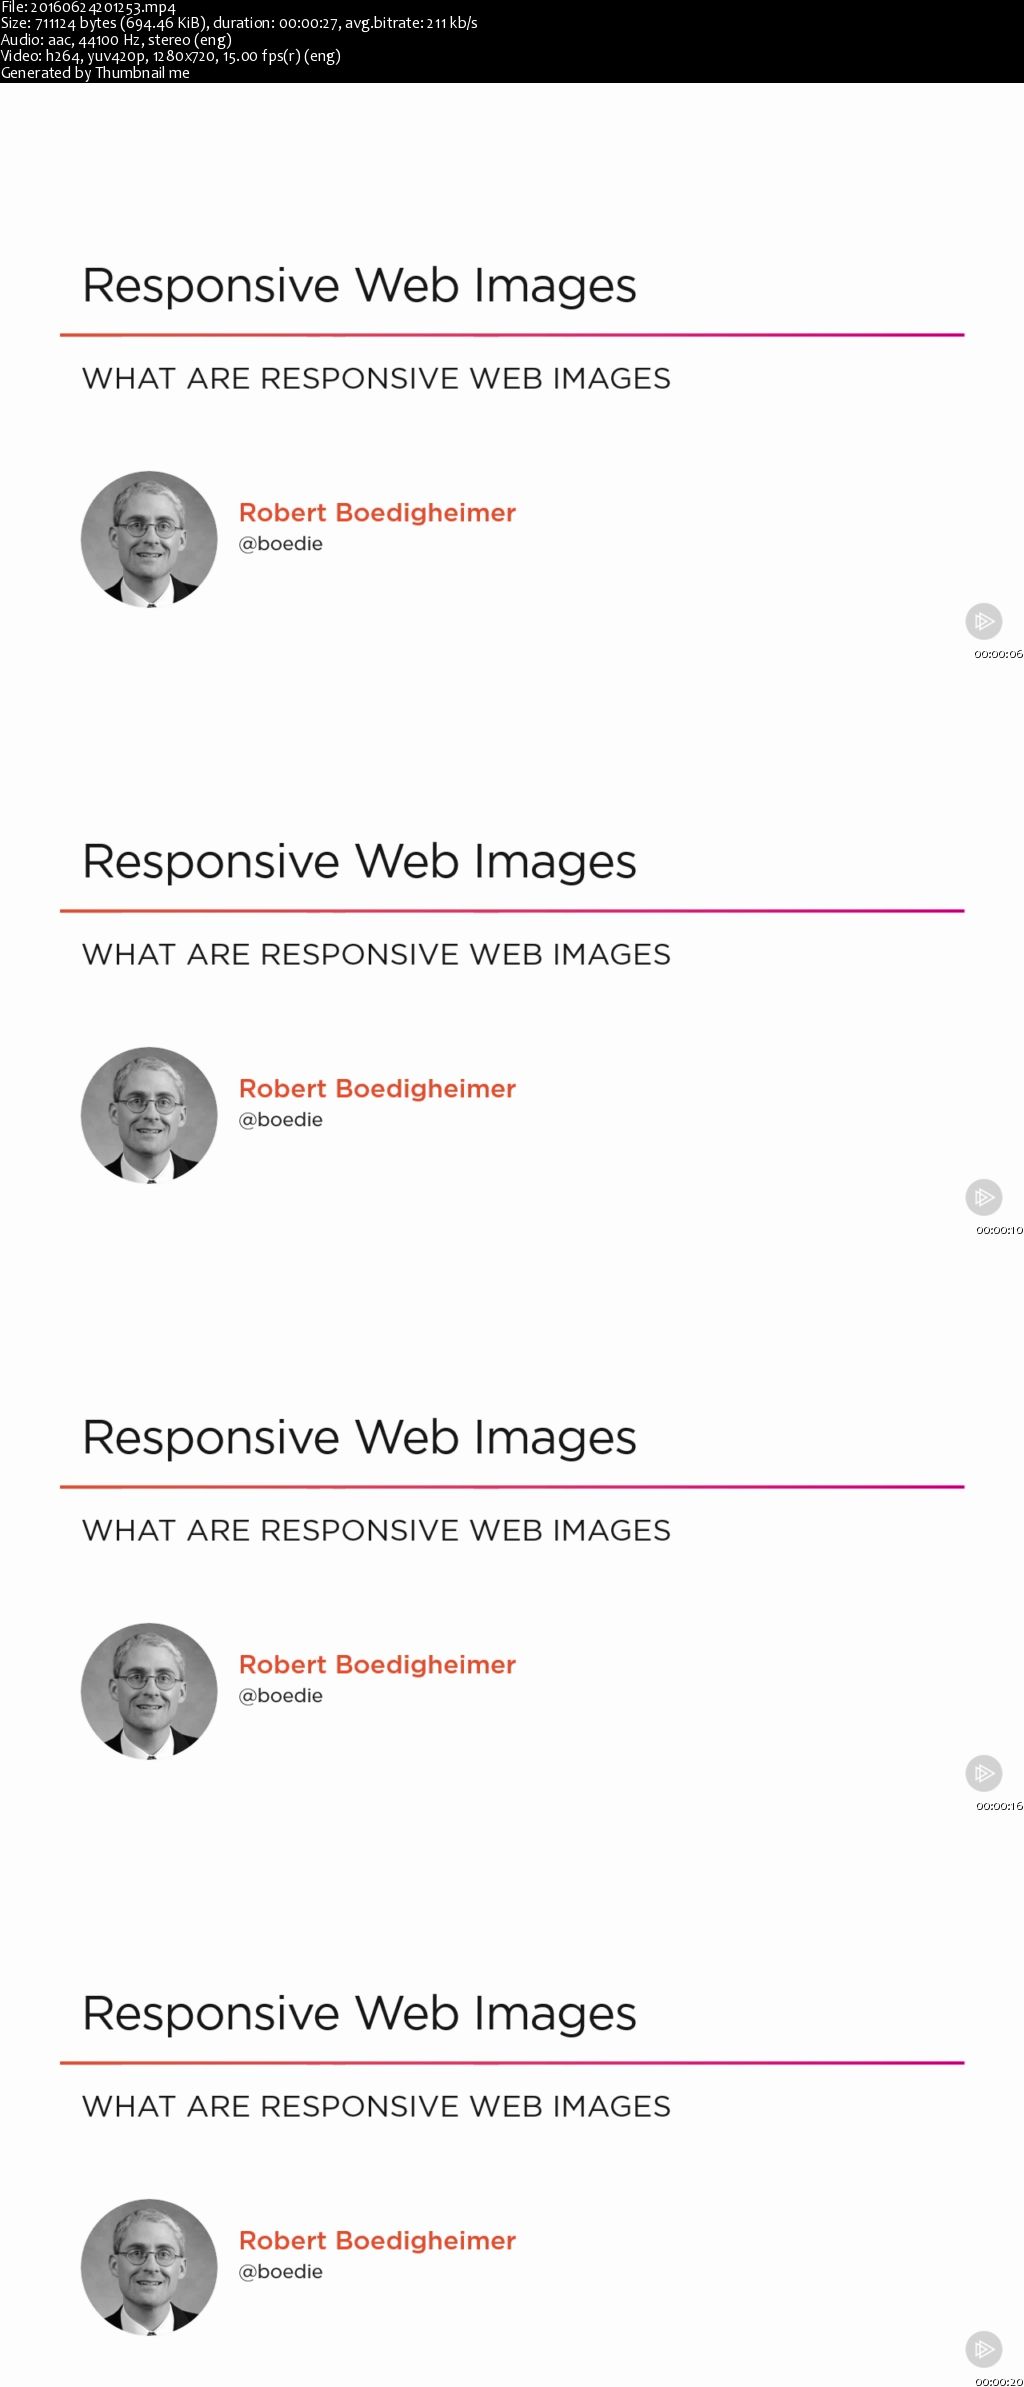 Responsive Web Images